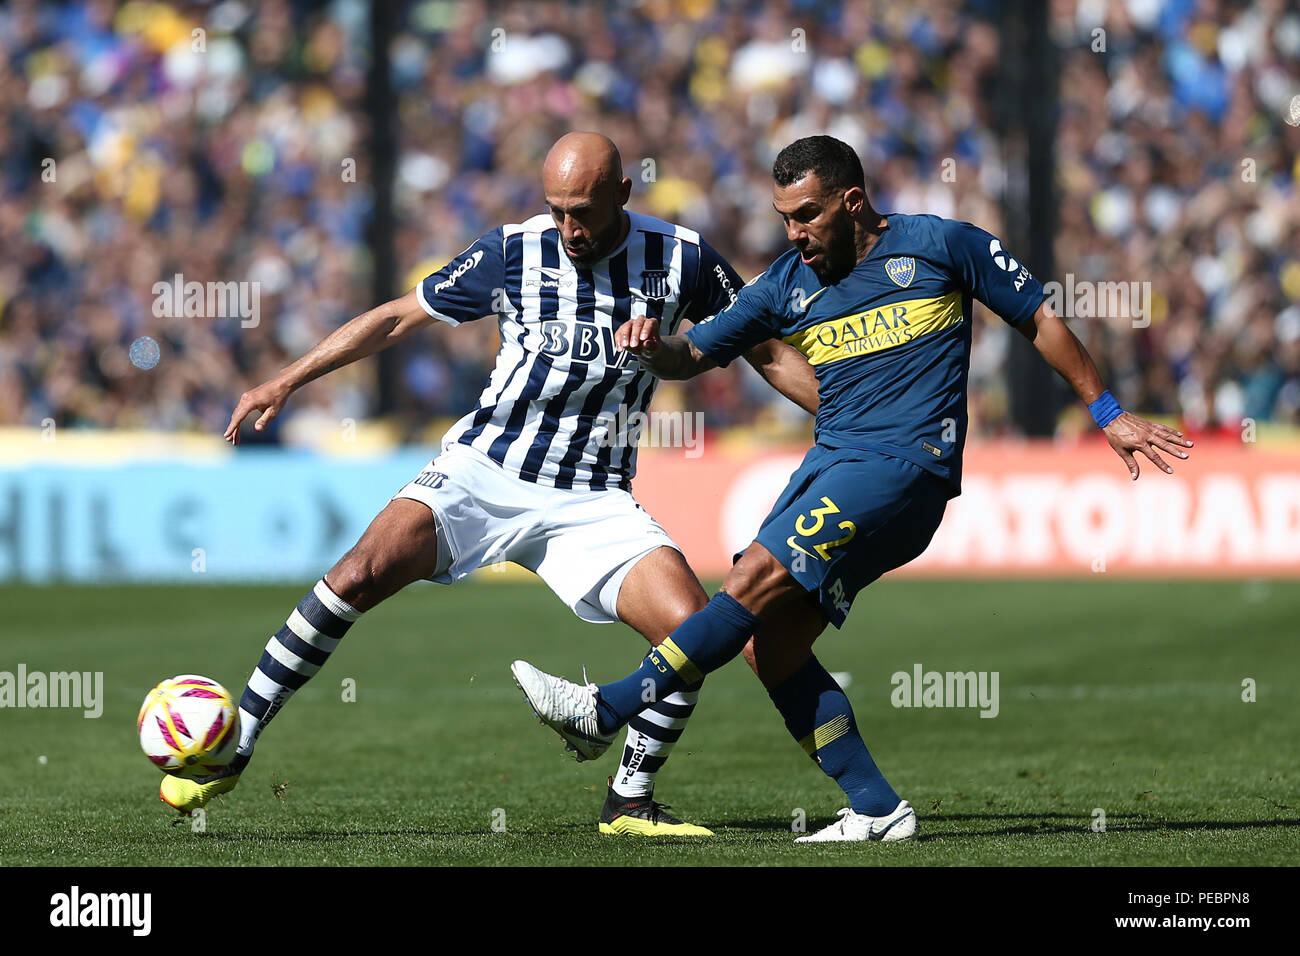 BUENOS AIRES, ARGENTINA - AUGUST 2018: Carlos Tevez (Boca Juniors) fights the ball against el Chapo (Talleres de Cordoba) on the first match for the s Stock Photo